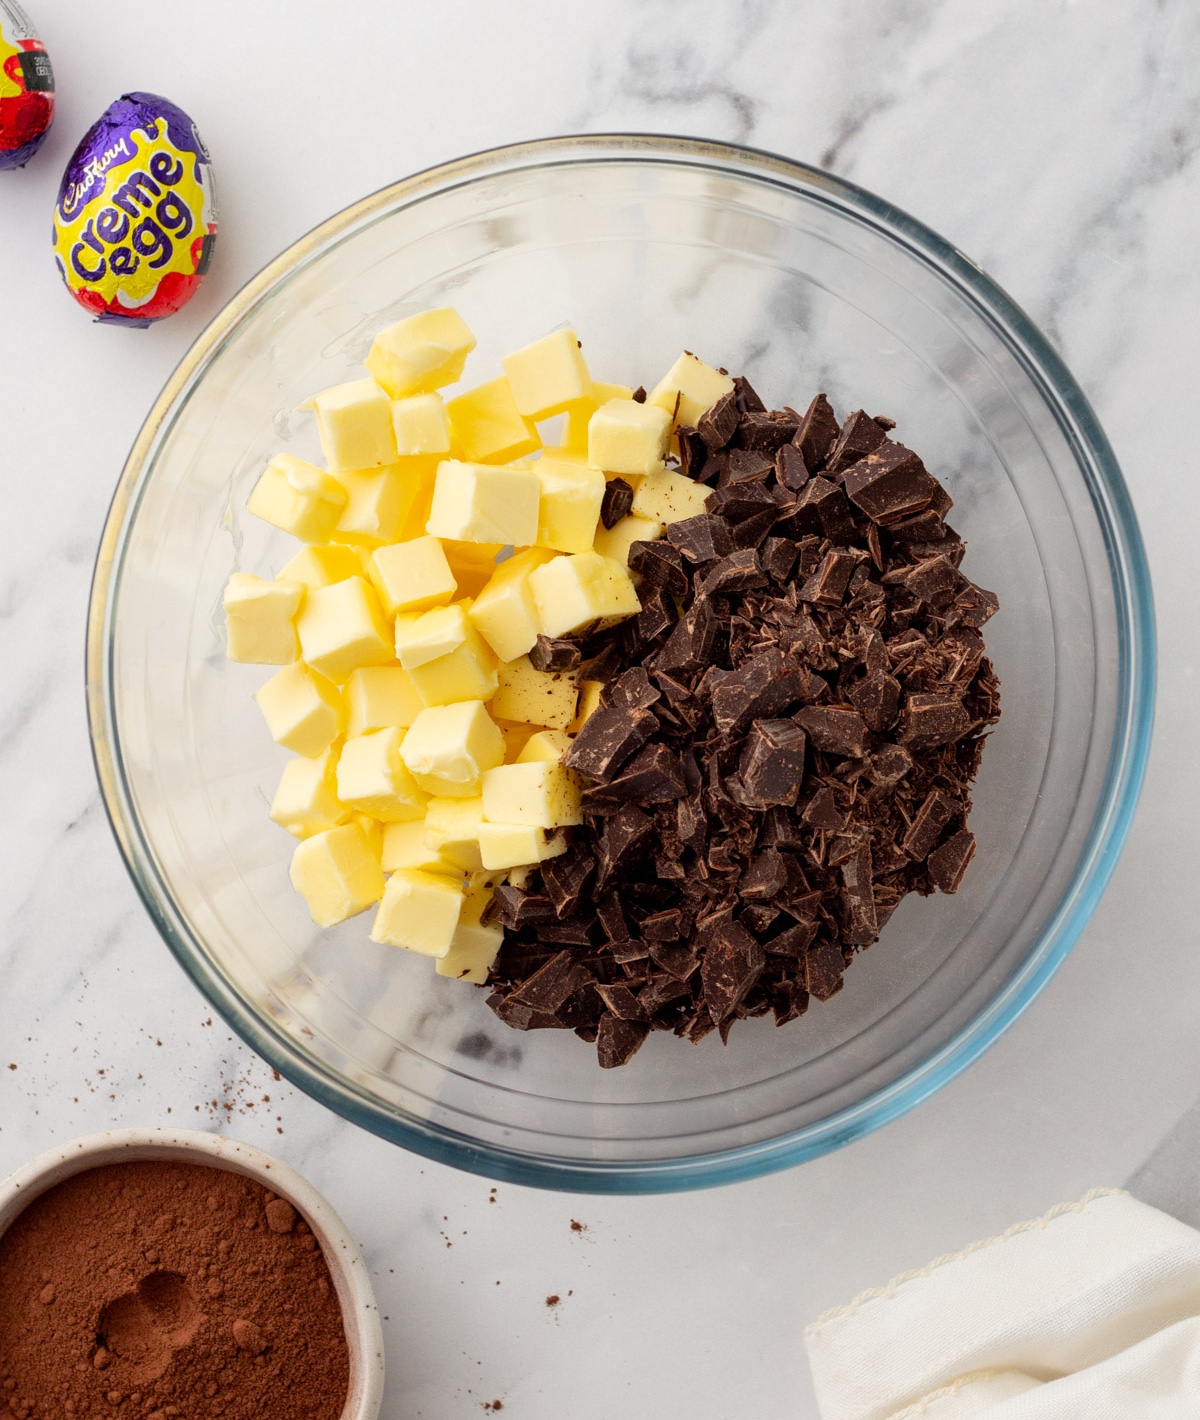 Chopped butter and dark chocolate added to a bowl